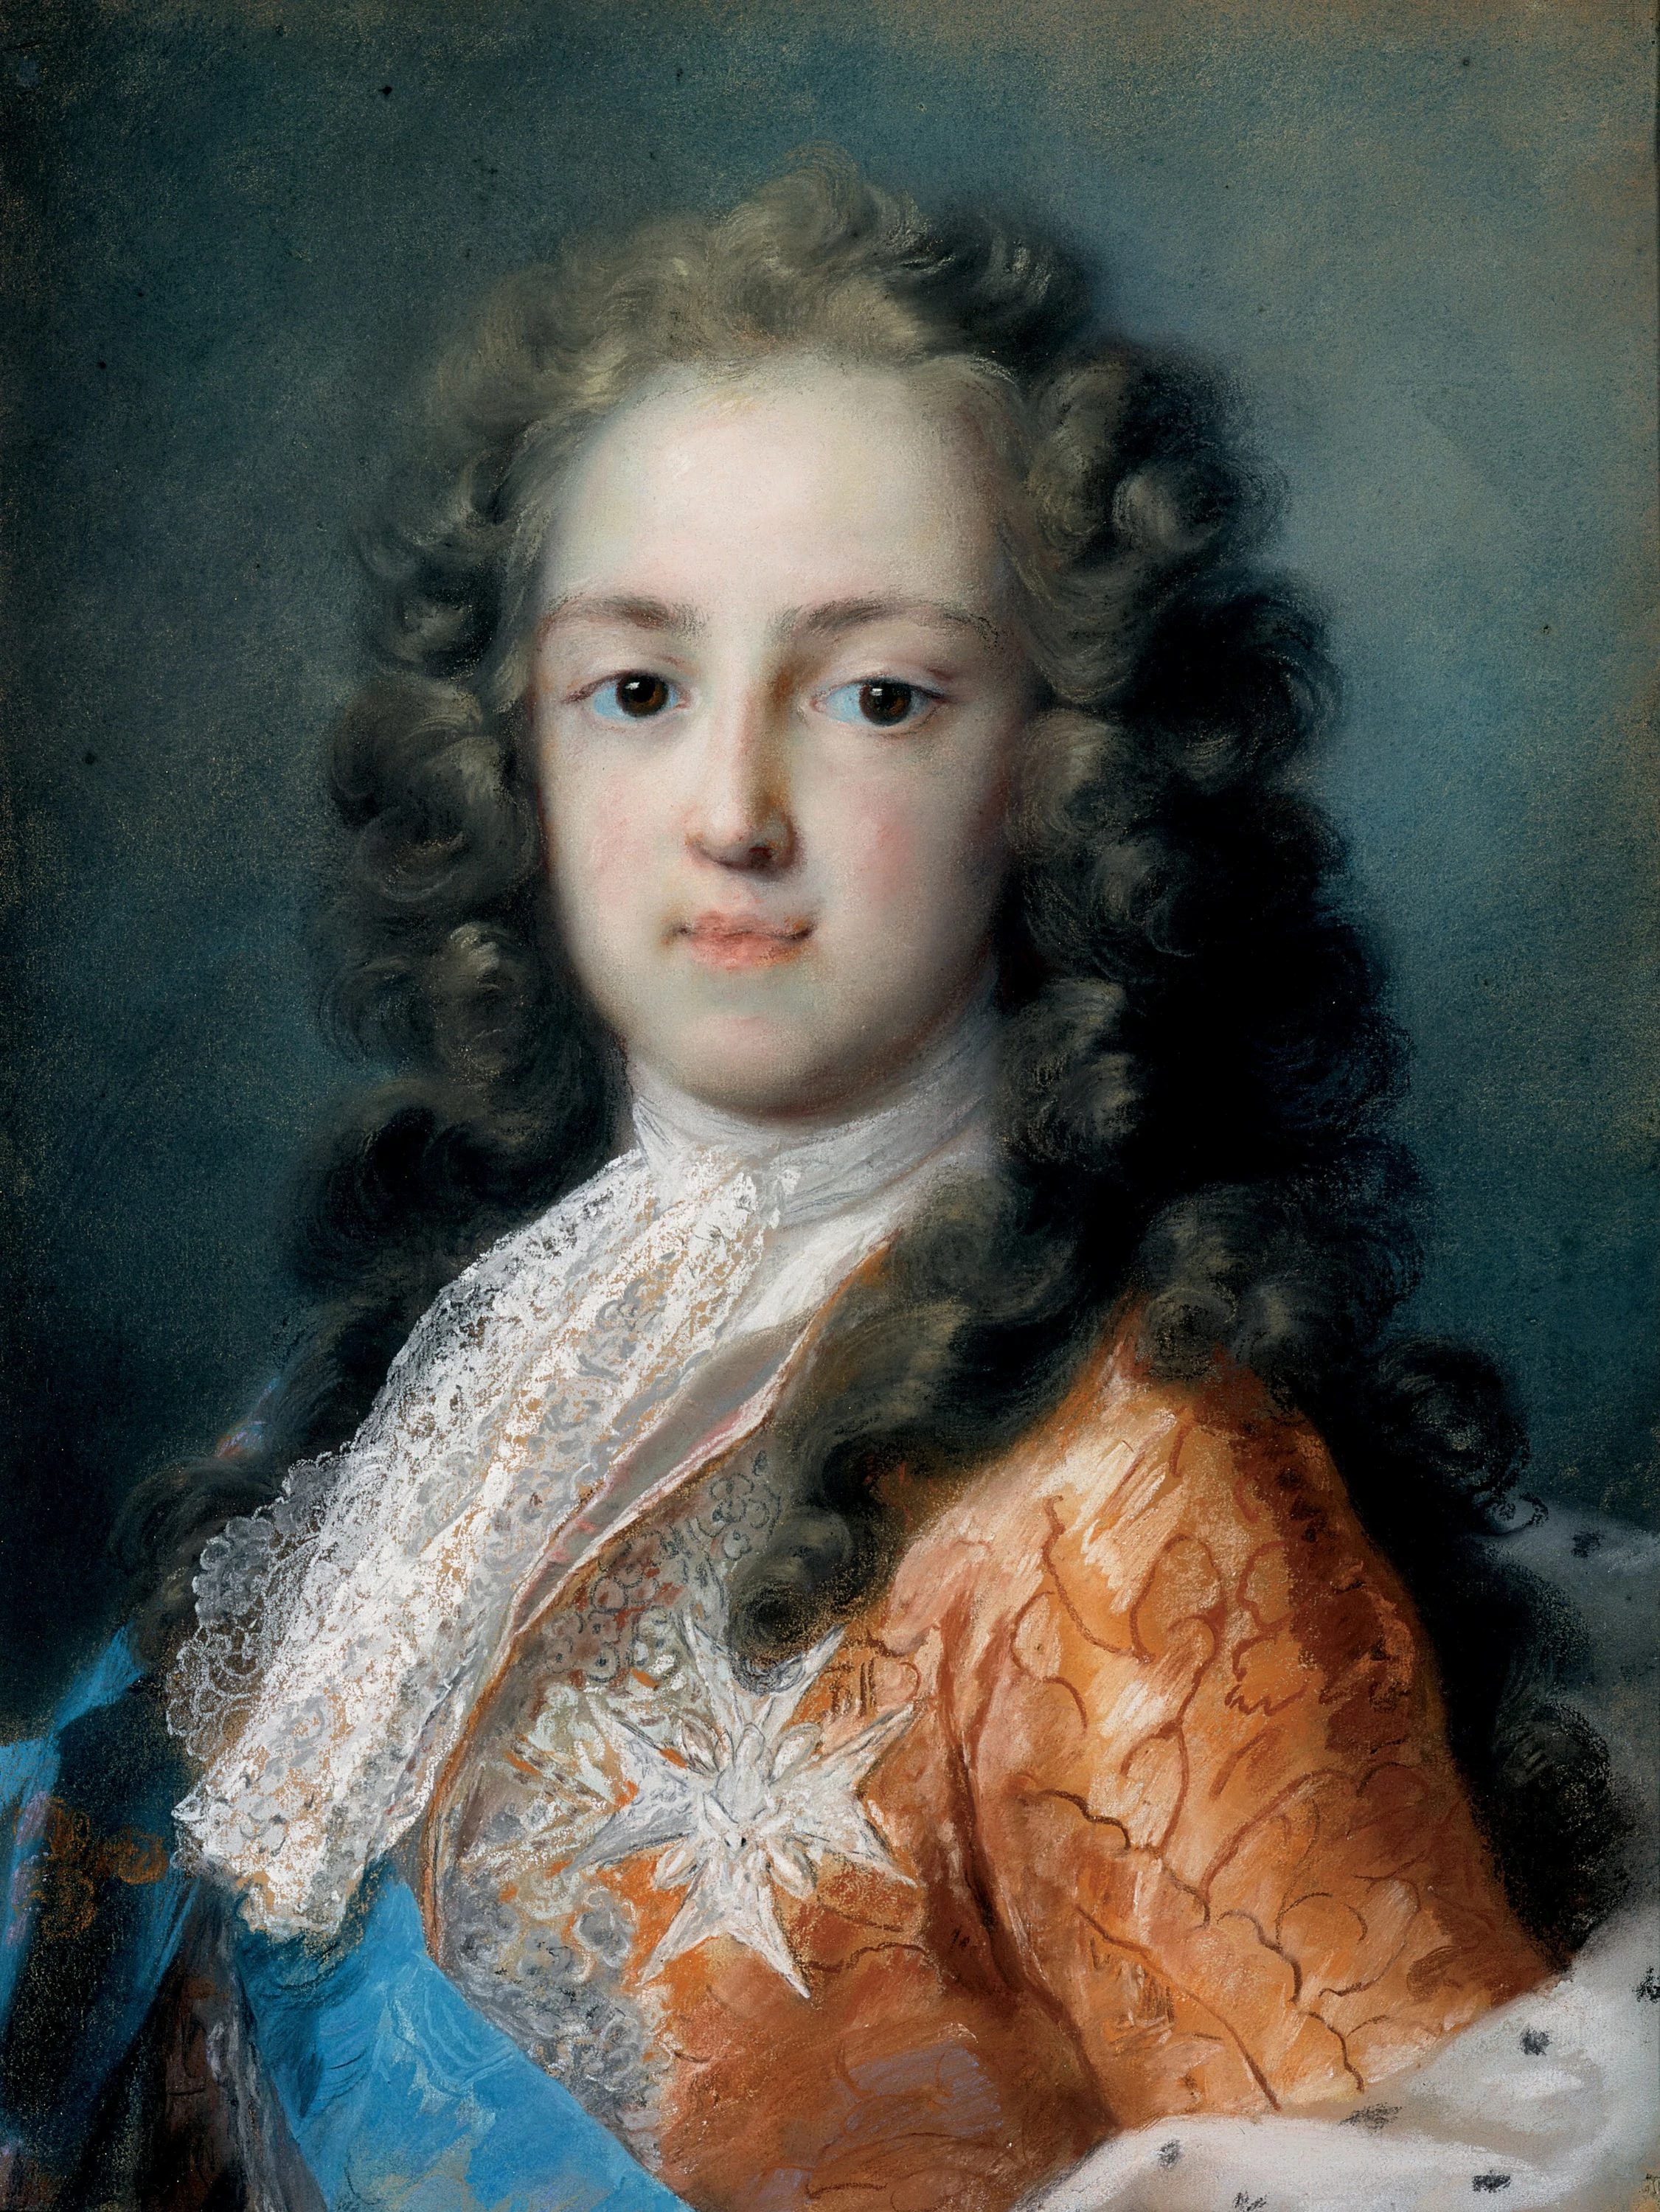 Louis XV of France as Dauphin, Rosalba Carriera